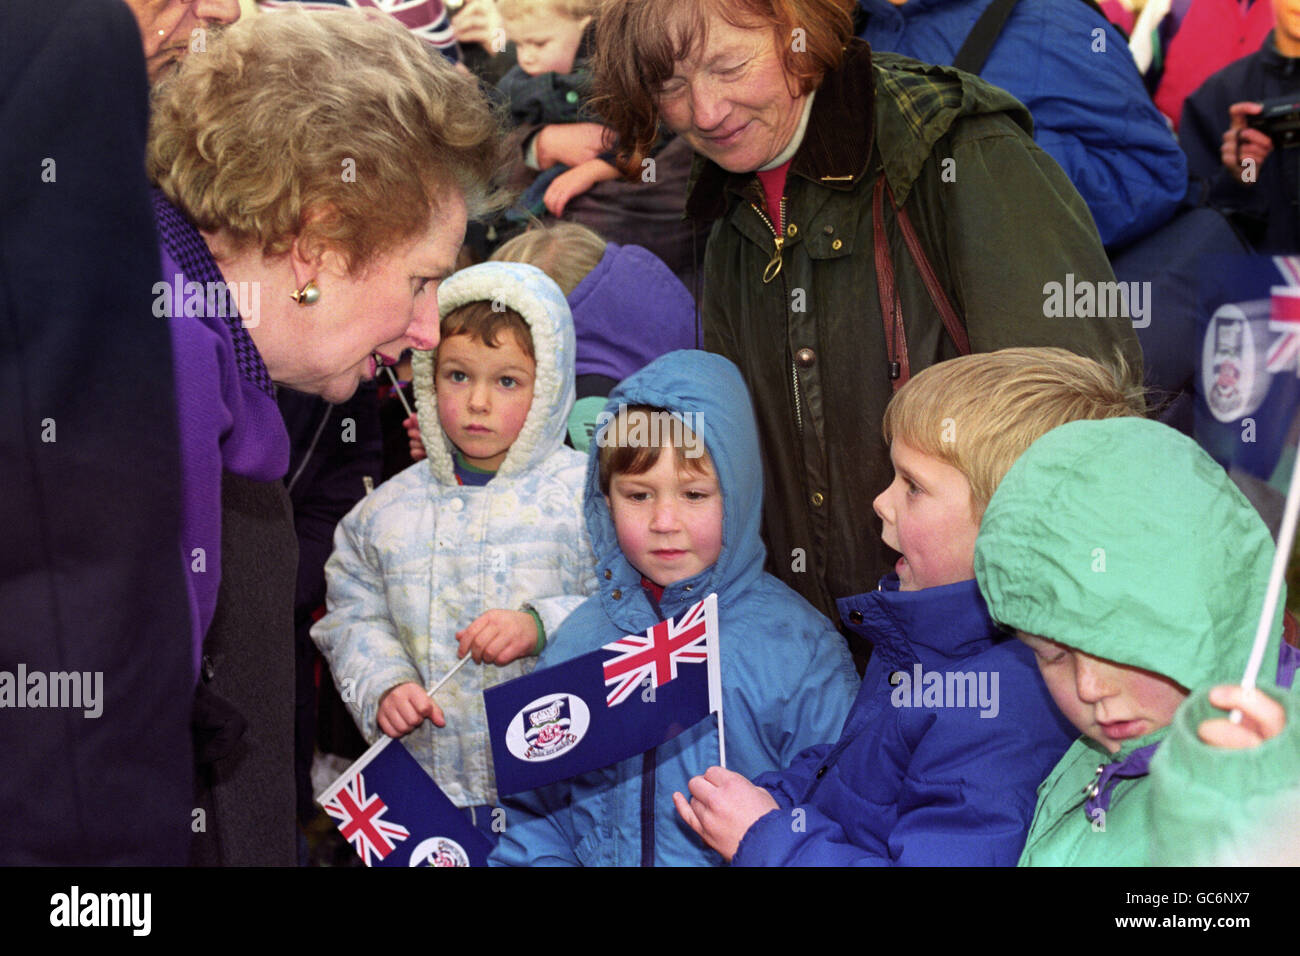 MRS. THATCHER IN PORT STANLEY FORMER P.M. MEETS CHILDREN FROM GOOSE GREEN IN PORT STANLEY DURING HER WALKABOUT. Stock Photo